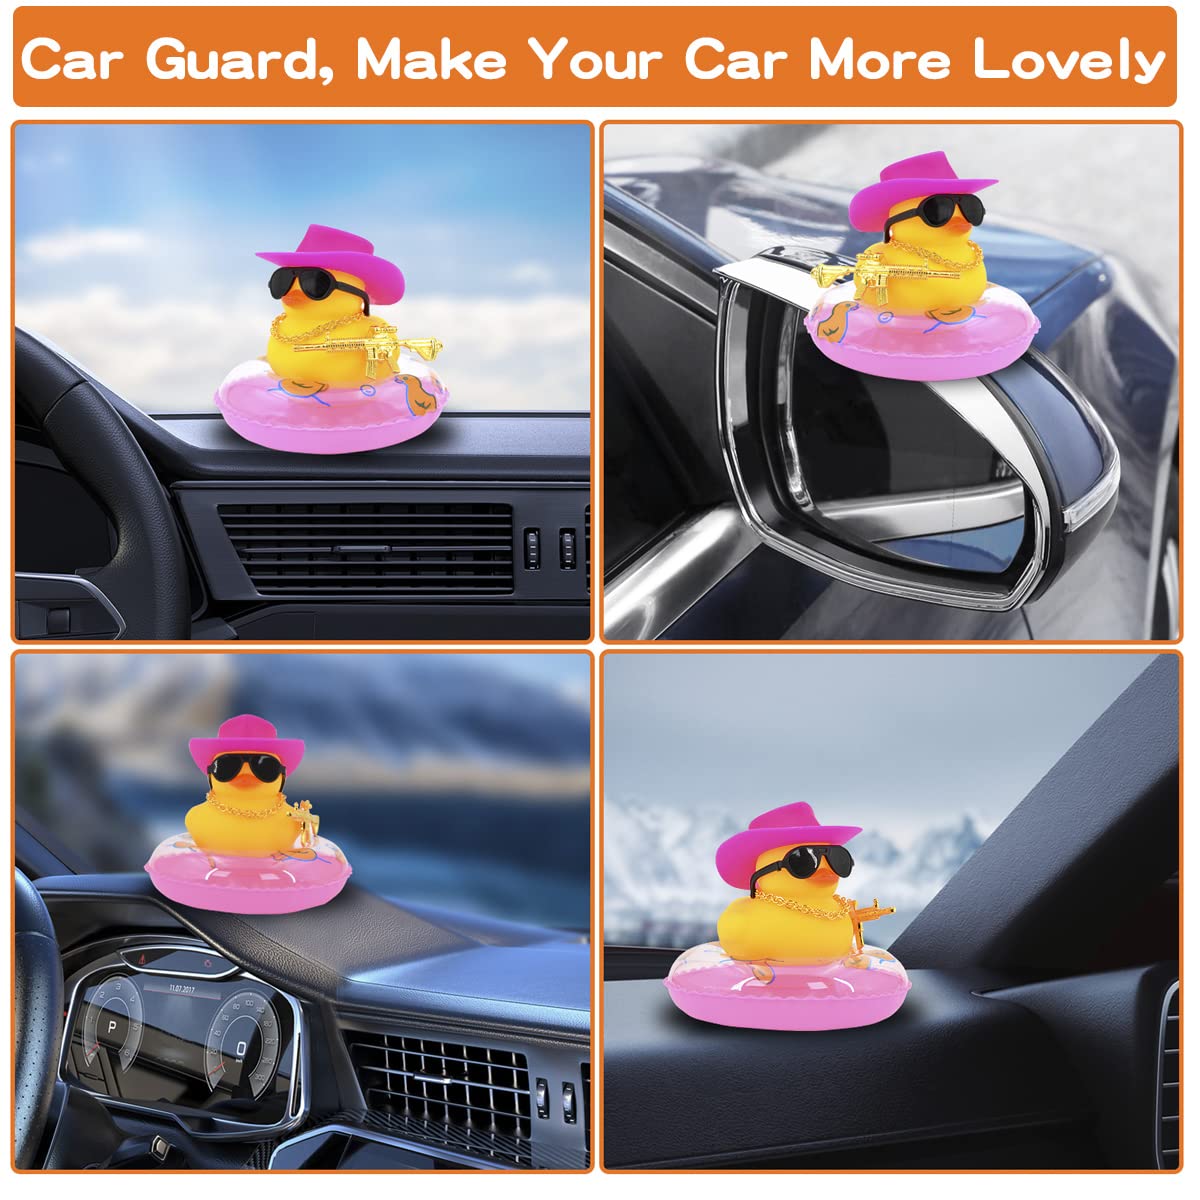 Rubber Duck for Car - Car Duck Decoration Dashboard, Rubber Duck Toy Car Ornament, Car Accessories Duck with Mini Sun Hat Swim Ring Necklace and Sunglasses for Party Favors, Birthdays, Bath Time